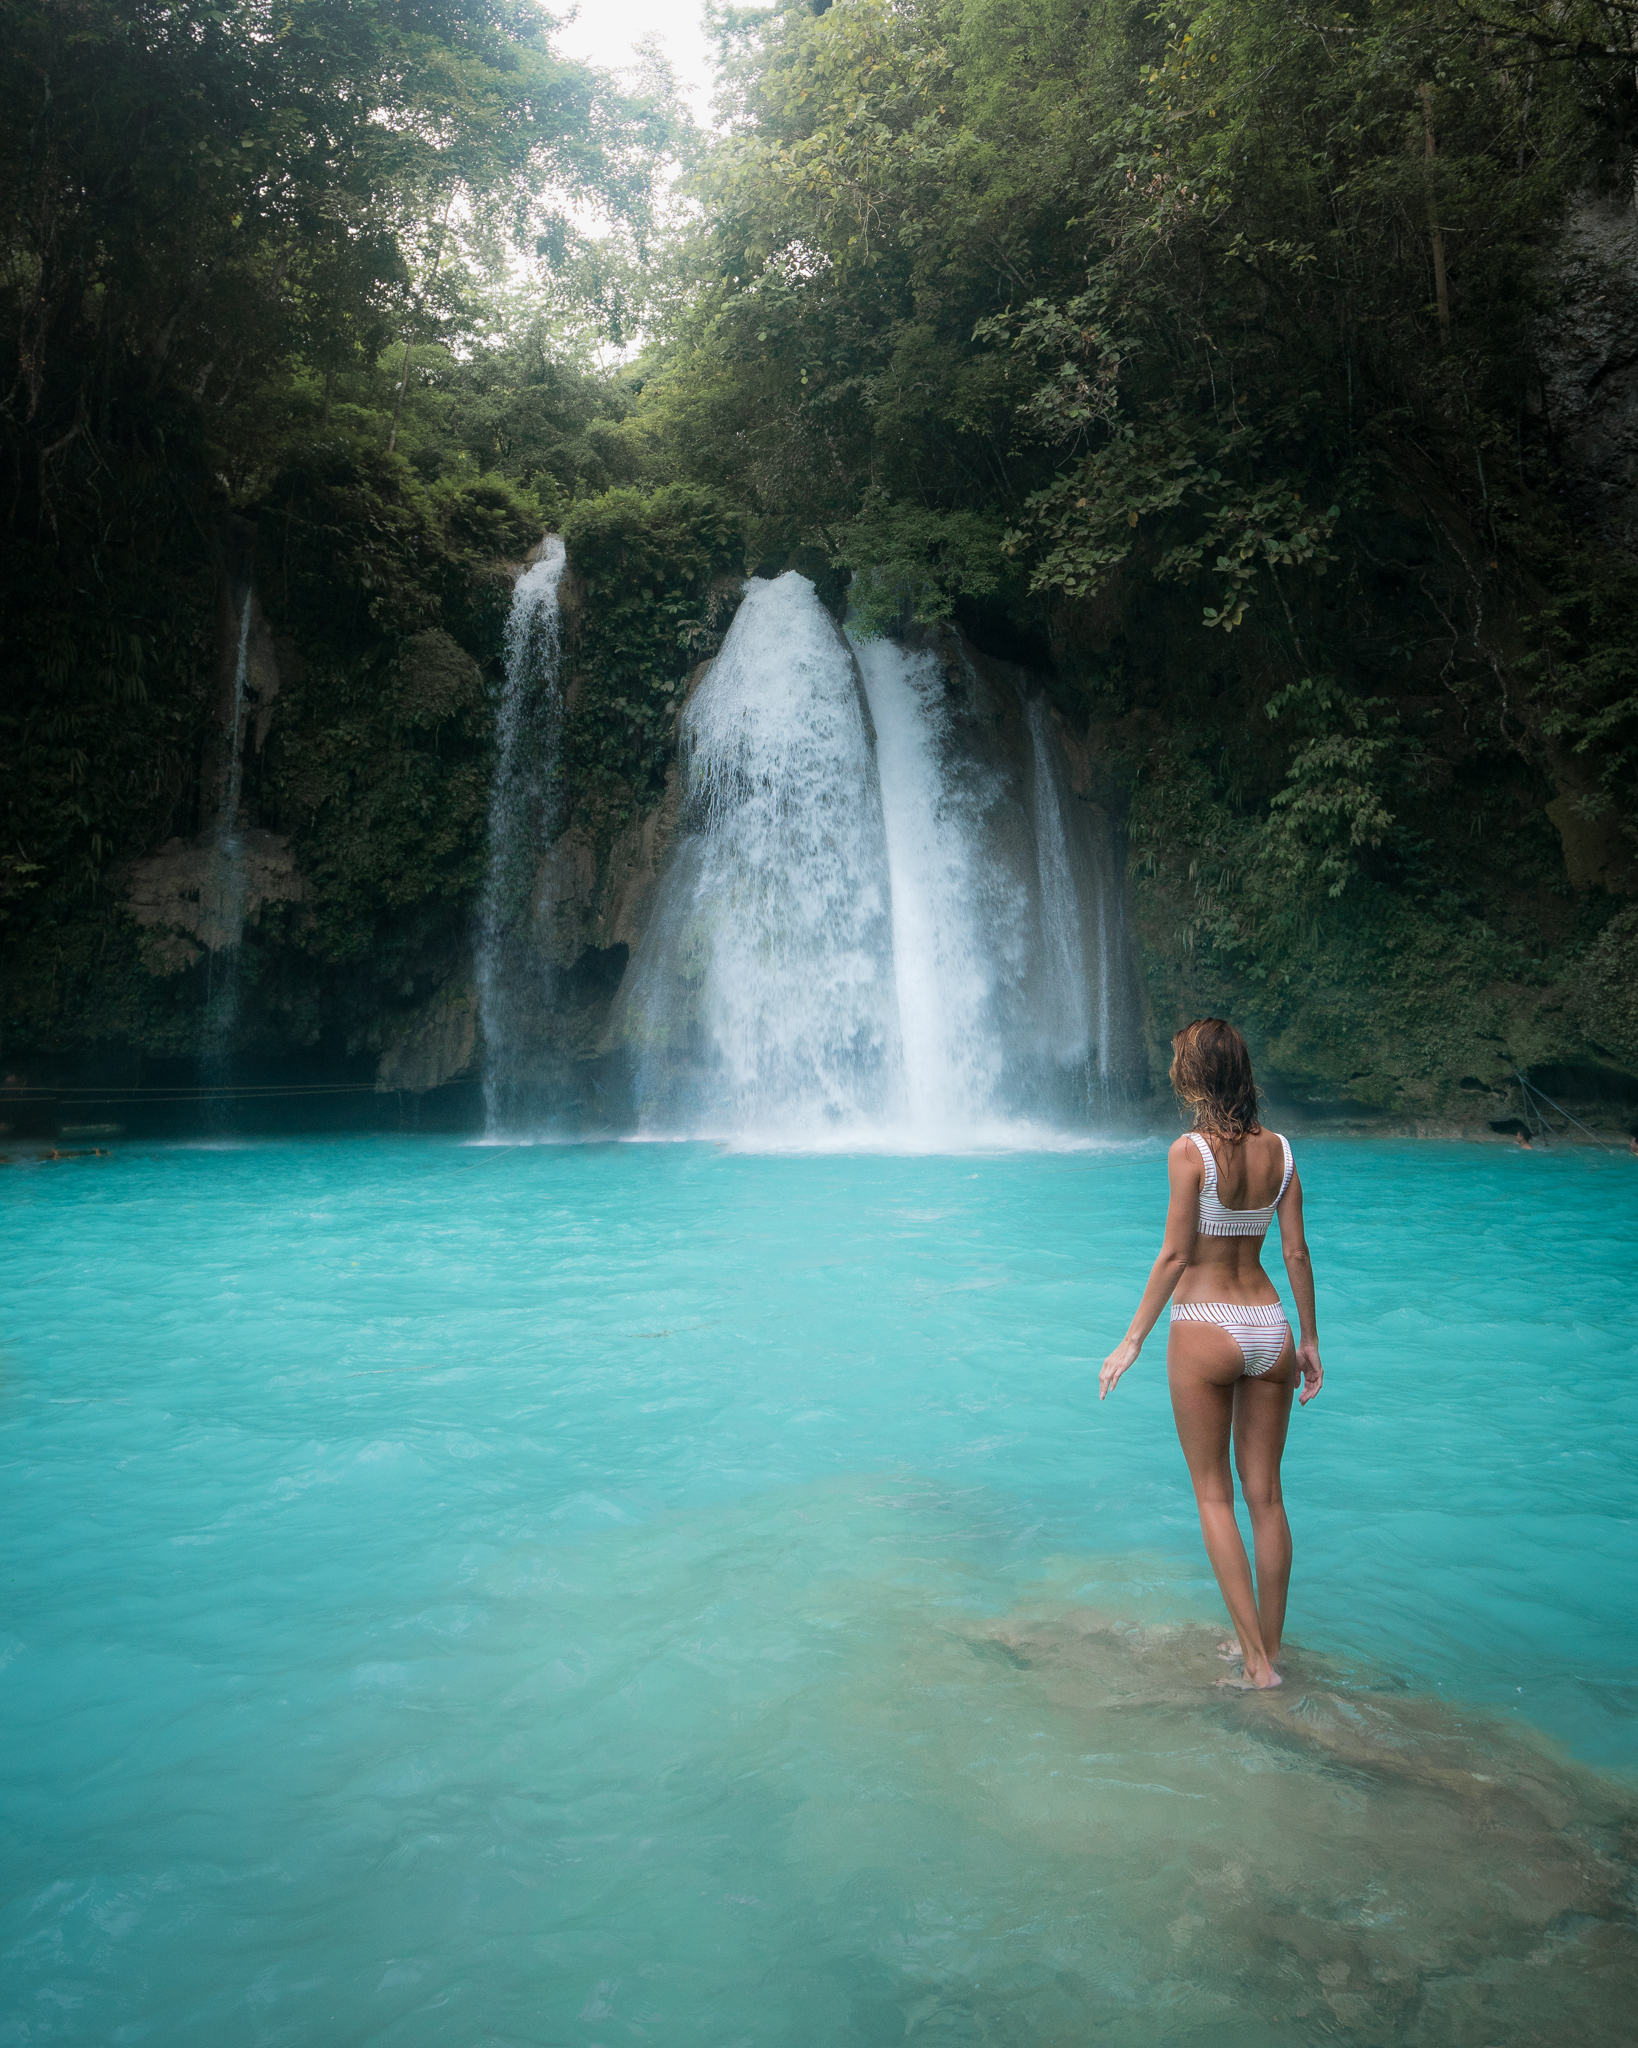 Kawasan Waterfall was the last stop on our canyoneering adventure.